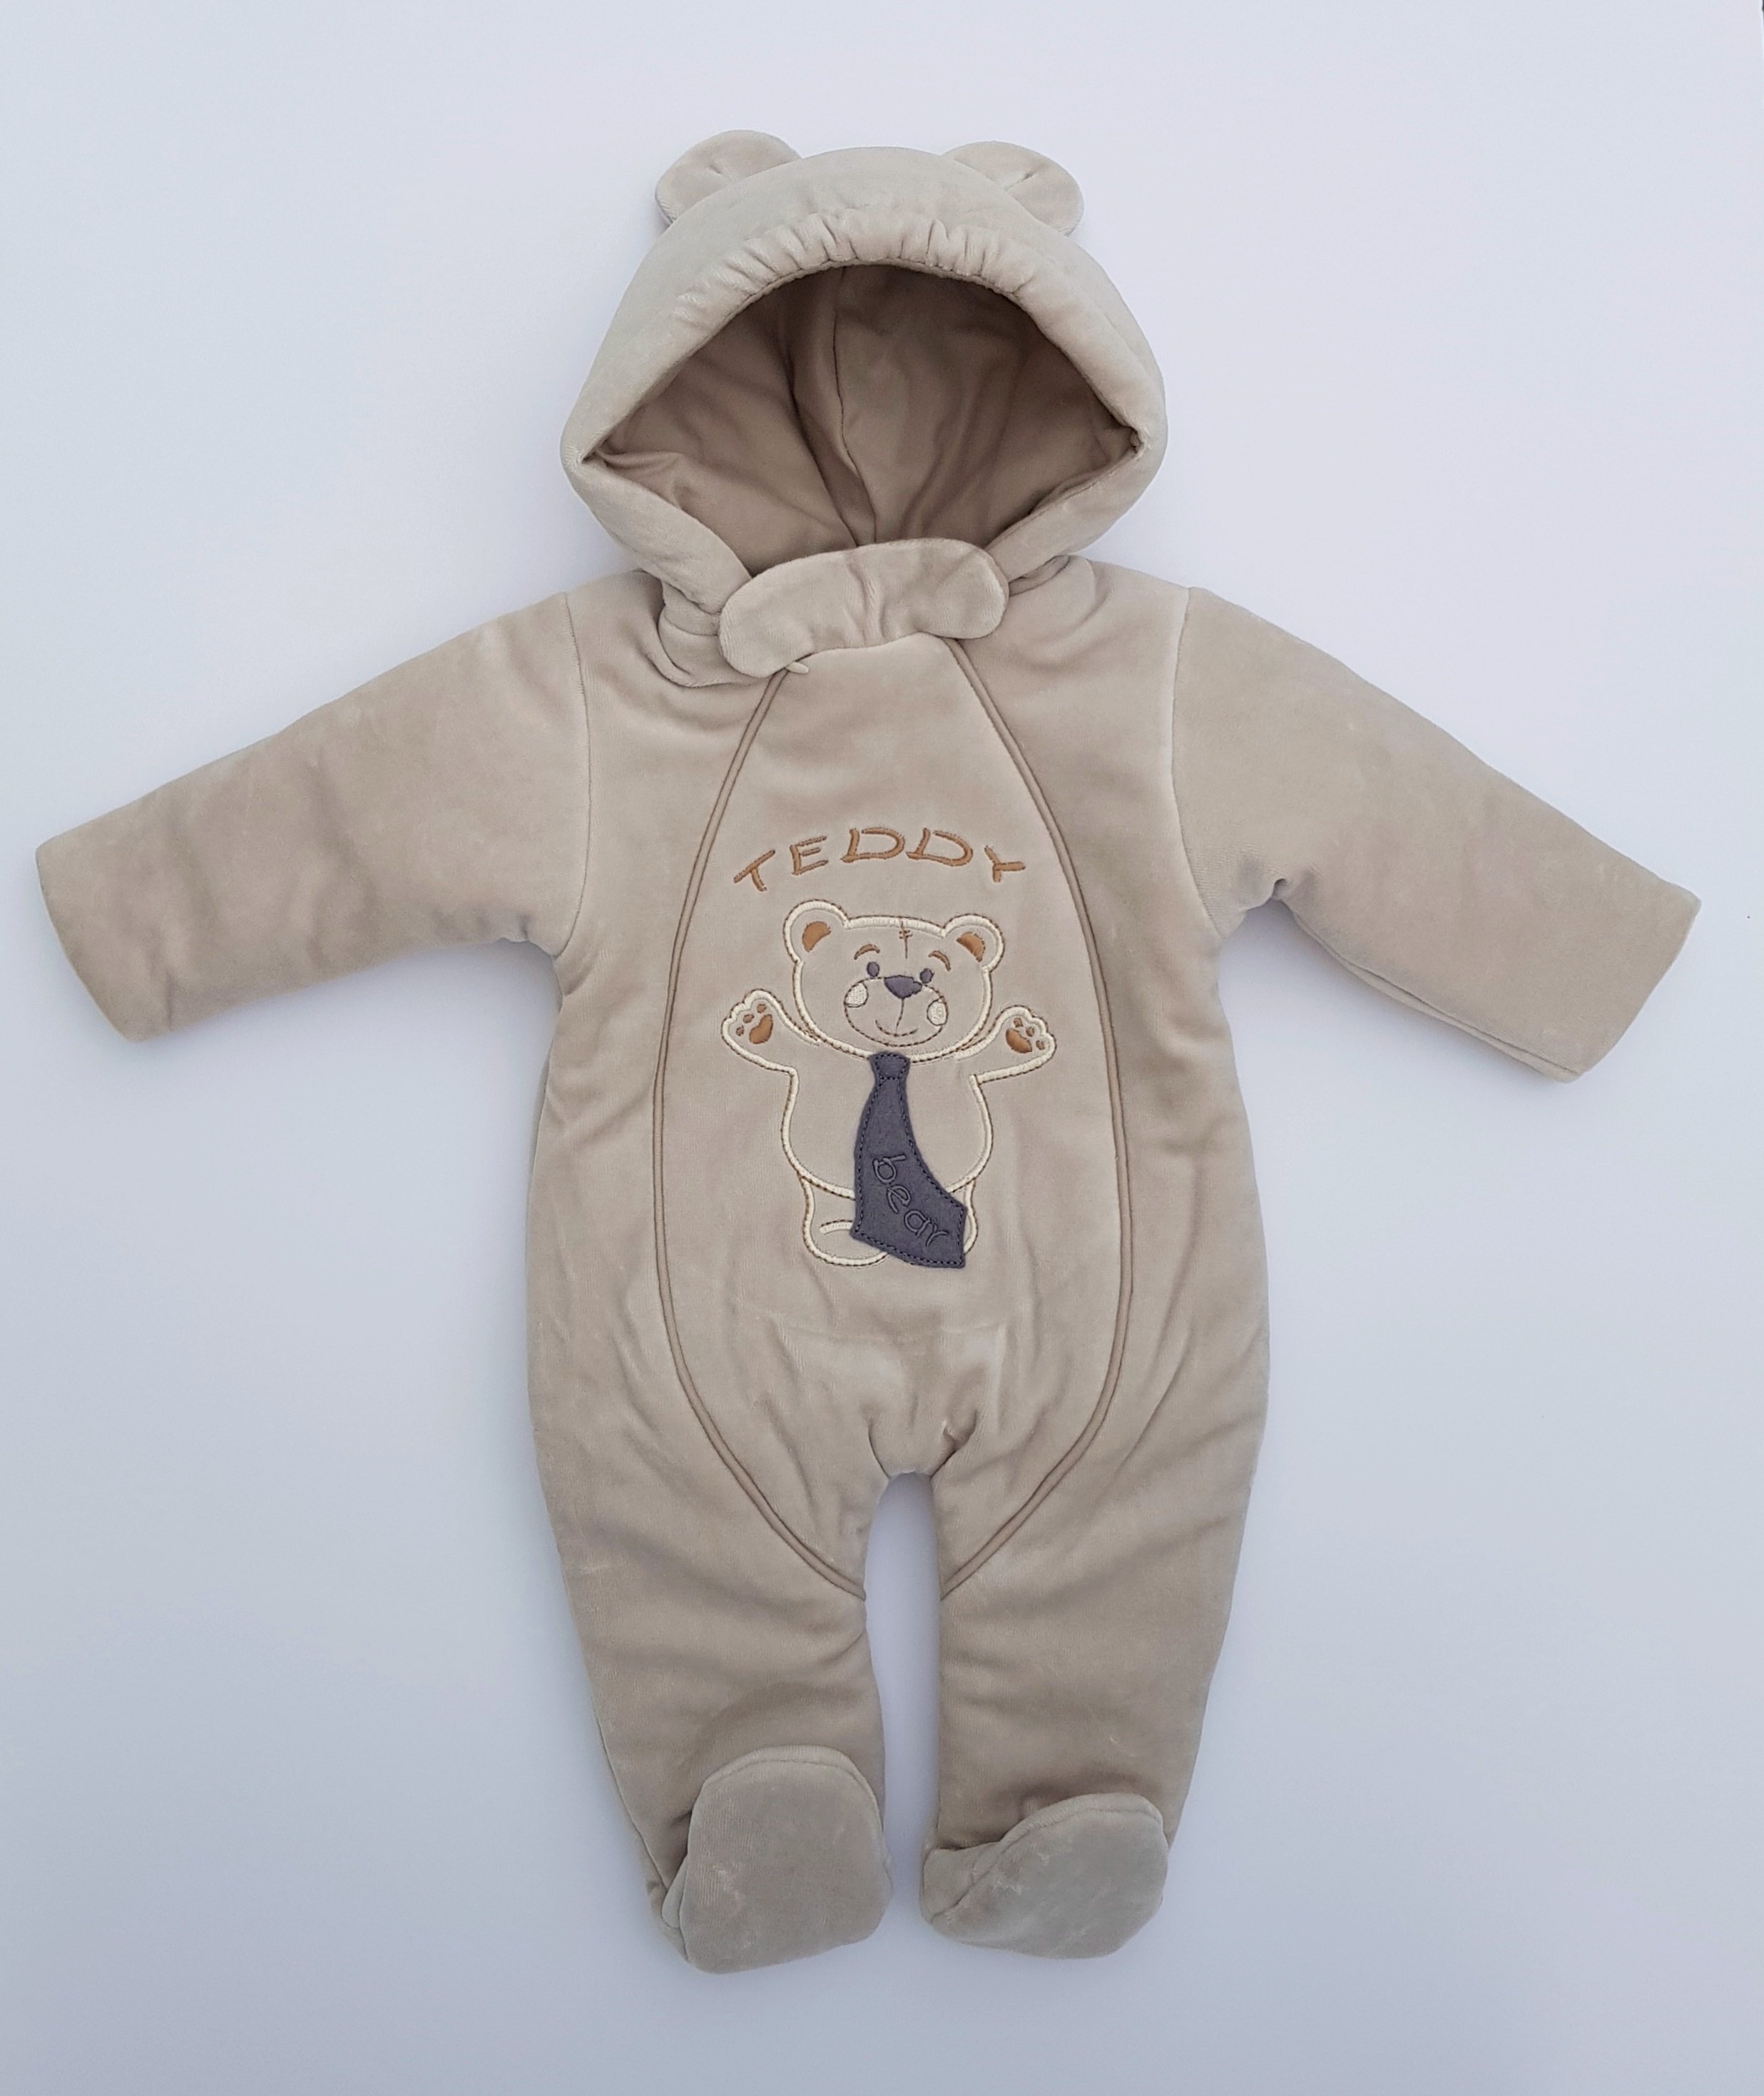 Baby Pram Suit All-In-One Snowsuit Puppy Baby Shower Ideas Gifts 6-9 Months – Bebe-Mar – evCushy